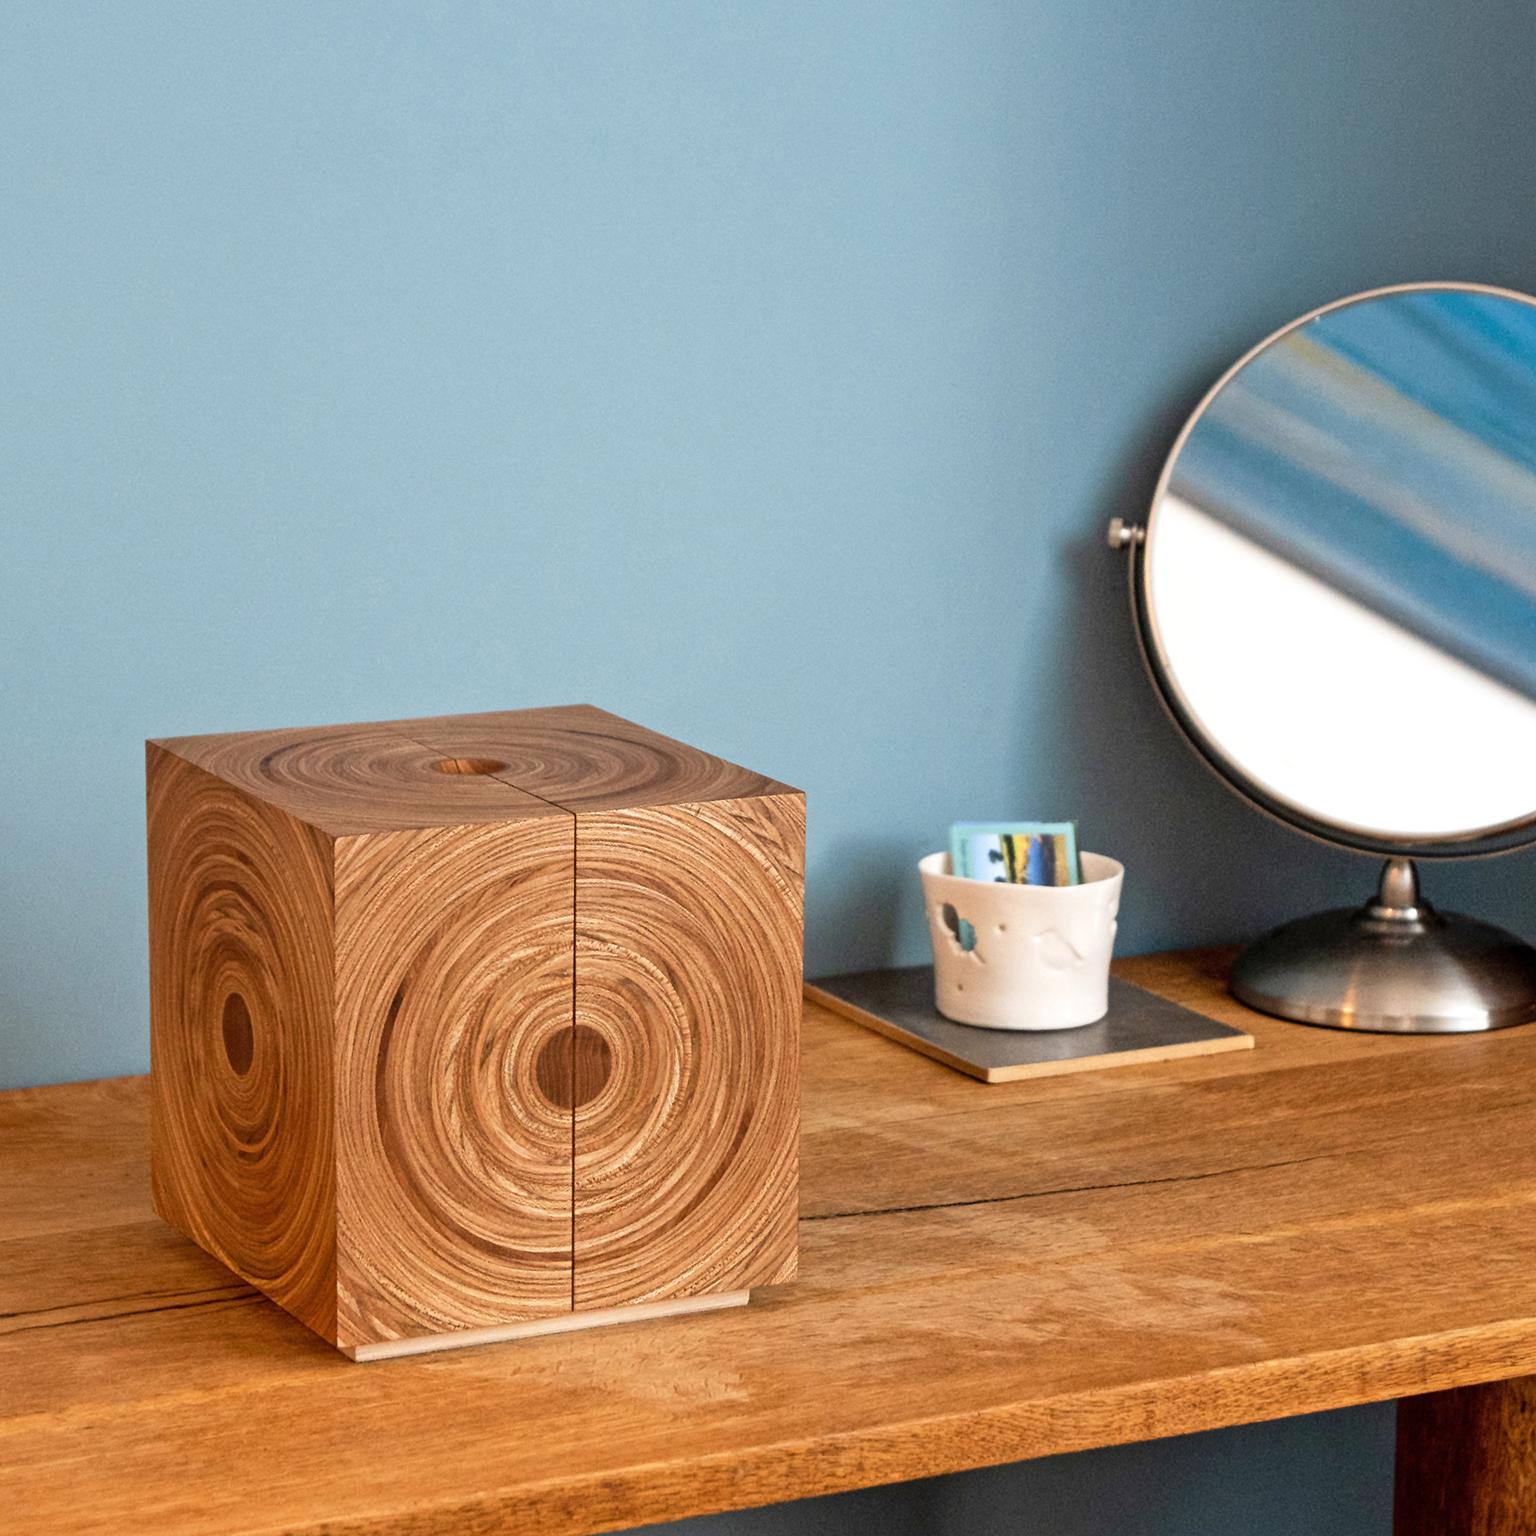 The contemporary cubed 'Squaring the Circle' jewellery box by Edward Johnson is made in elm and fumed oak with a teal internal suedette fabric.

Each side of the jewellery box is made from Edward’s circular ‘Murano’ veneers with each surface